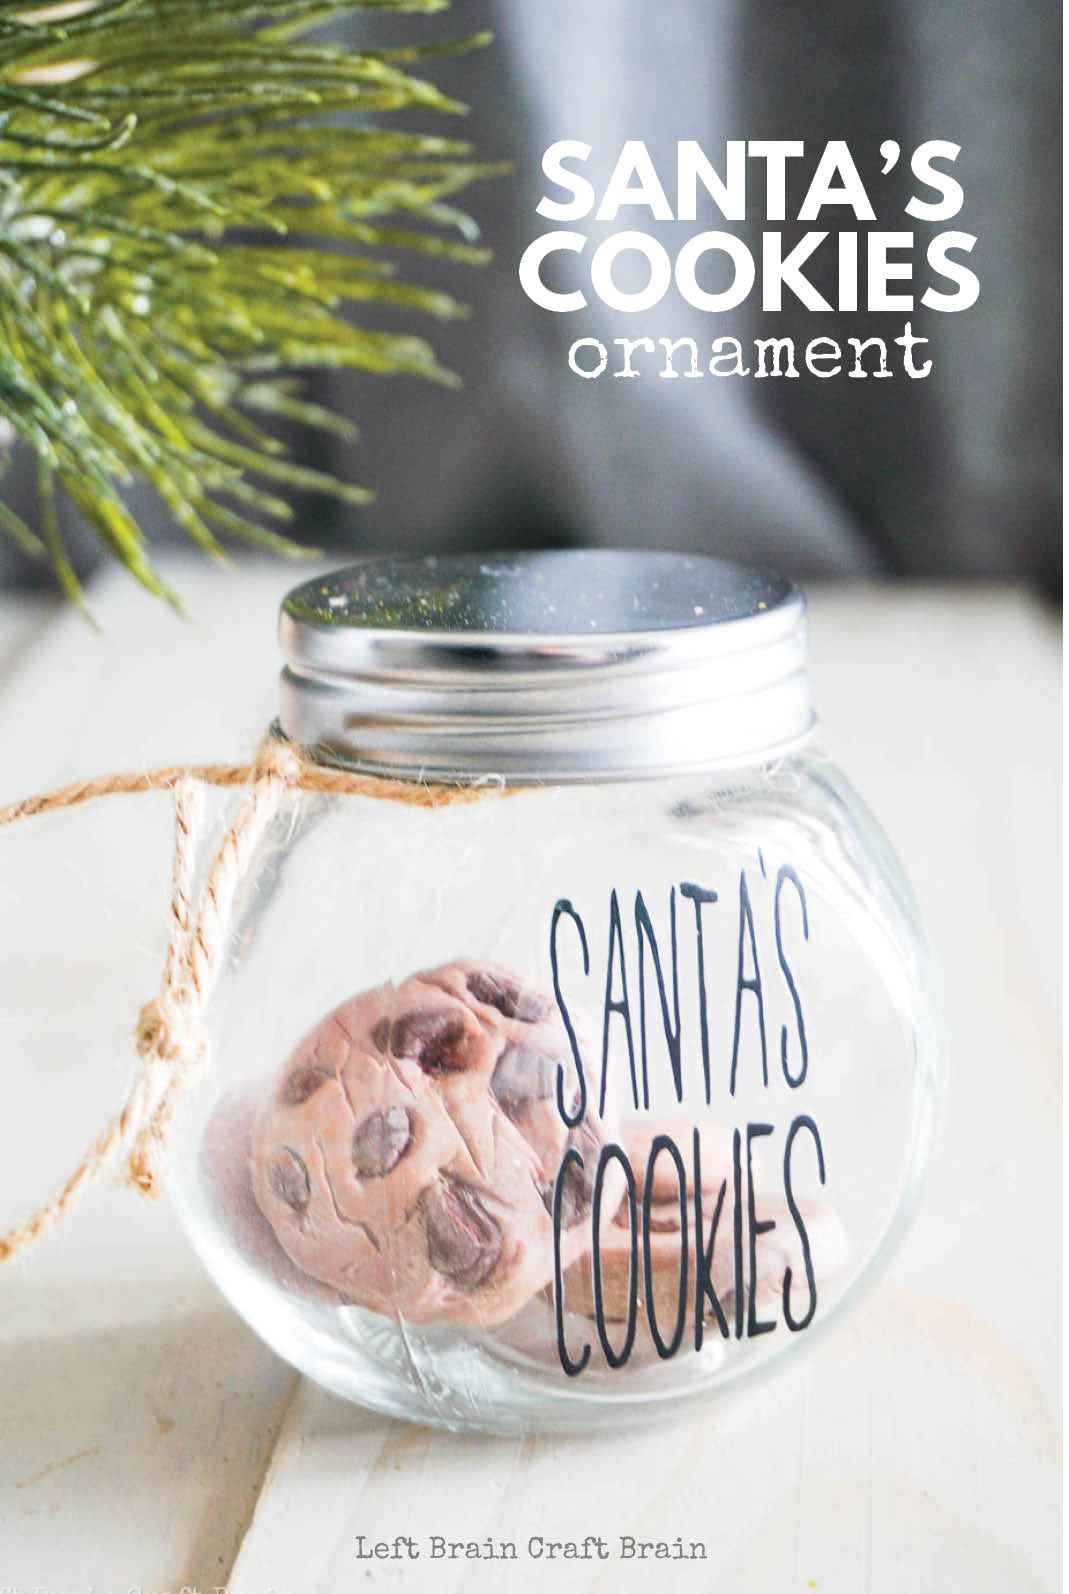 Make this adorable Santa's Cookies DIY Christmas Ornament for a fun gift for the kids or activity to do with the kids. It makes a great gift along with a batch of homemade cookies, too. What a sweet Christmas tradition!